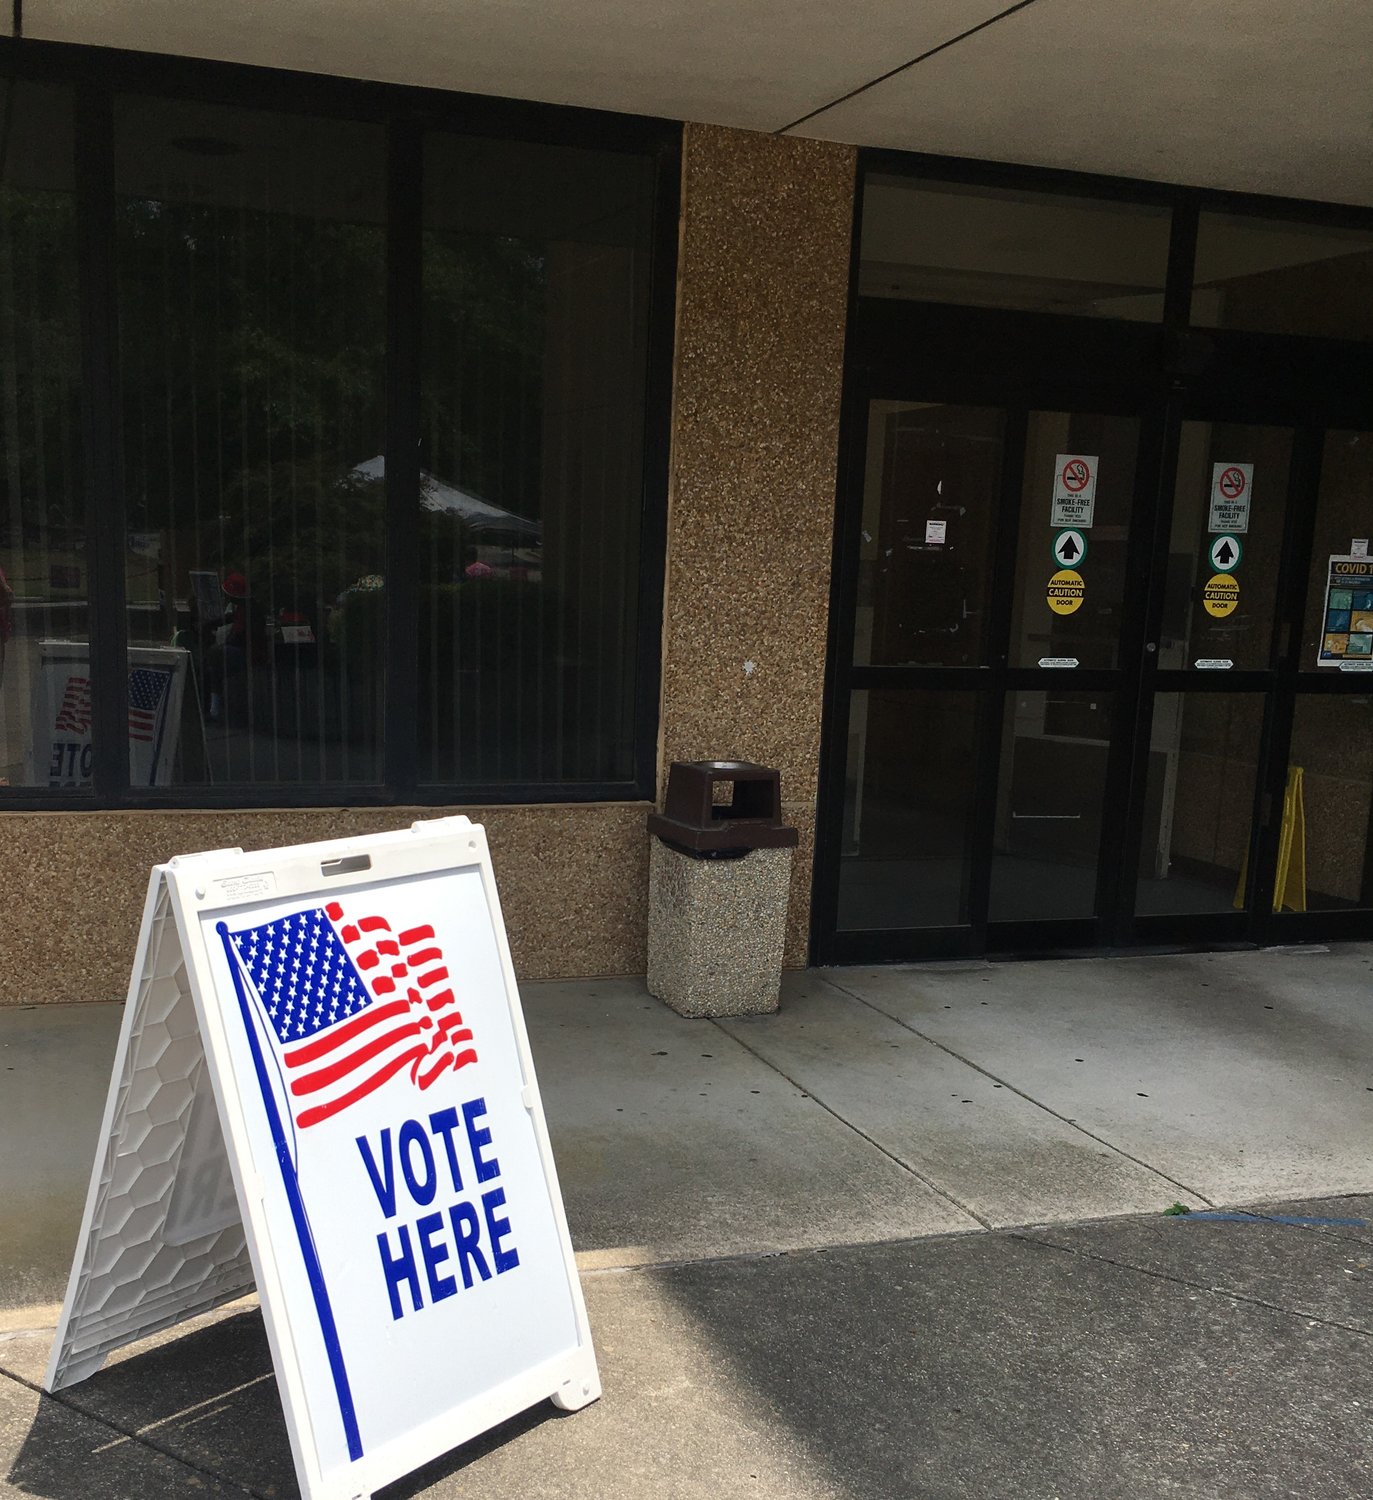 Early voting began Thursday in the elections for Fayetteville mayor and City Council. Early voting continues through July 23 at the Cumberland County Board of Elections Office, 227 Fountainhead Lane.